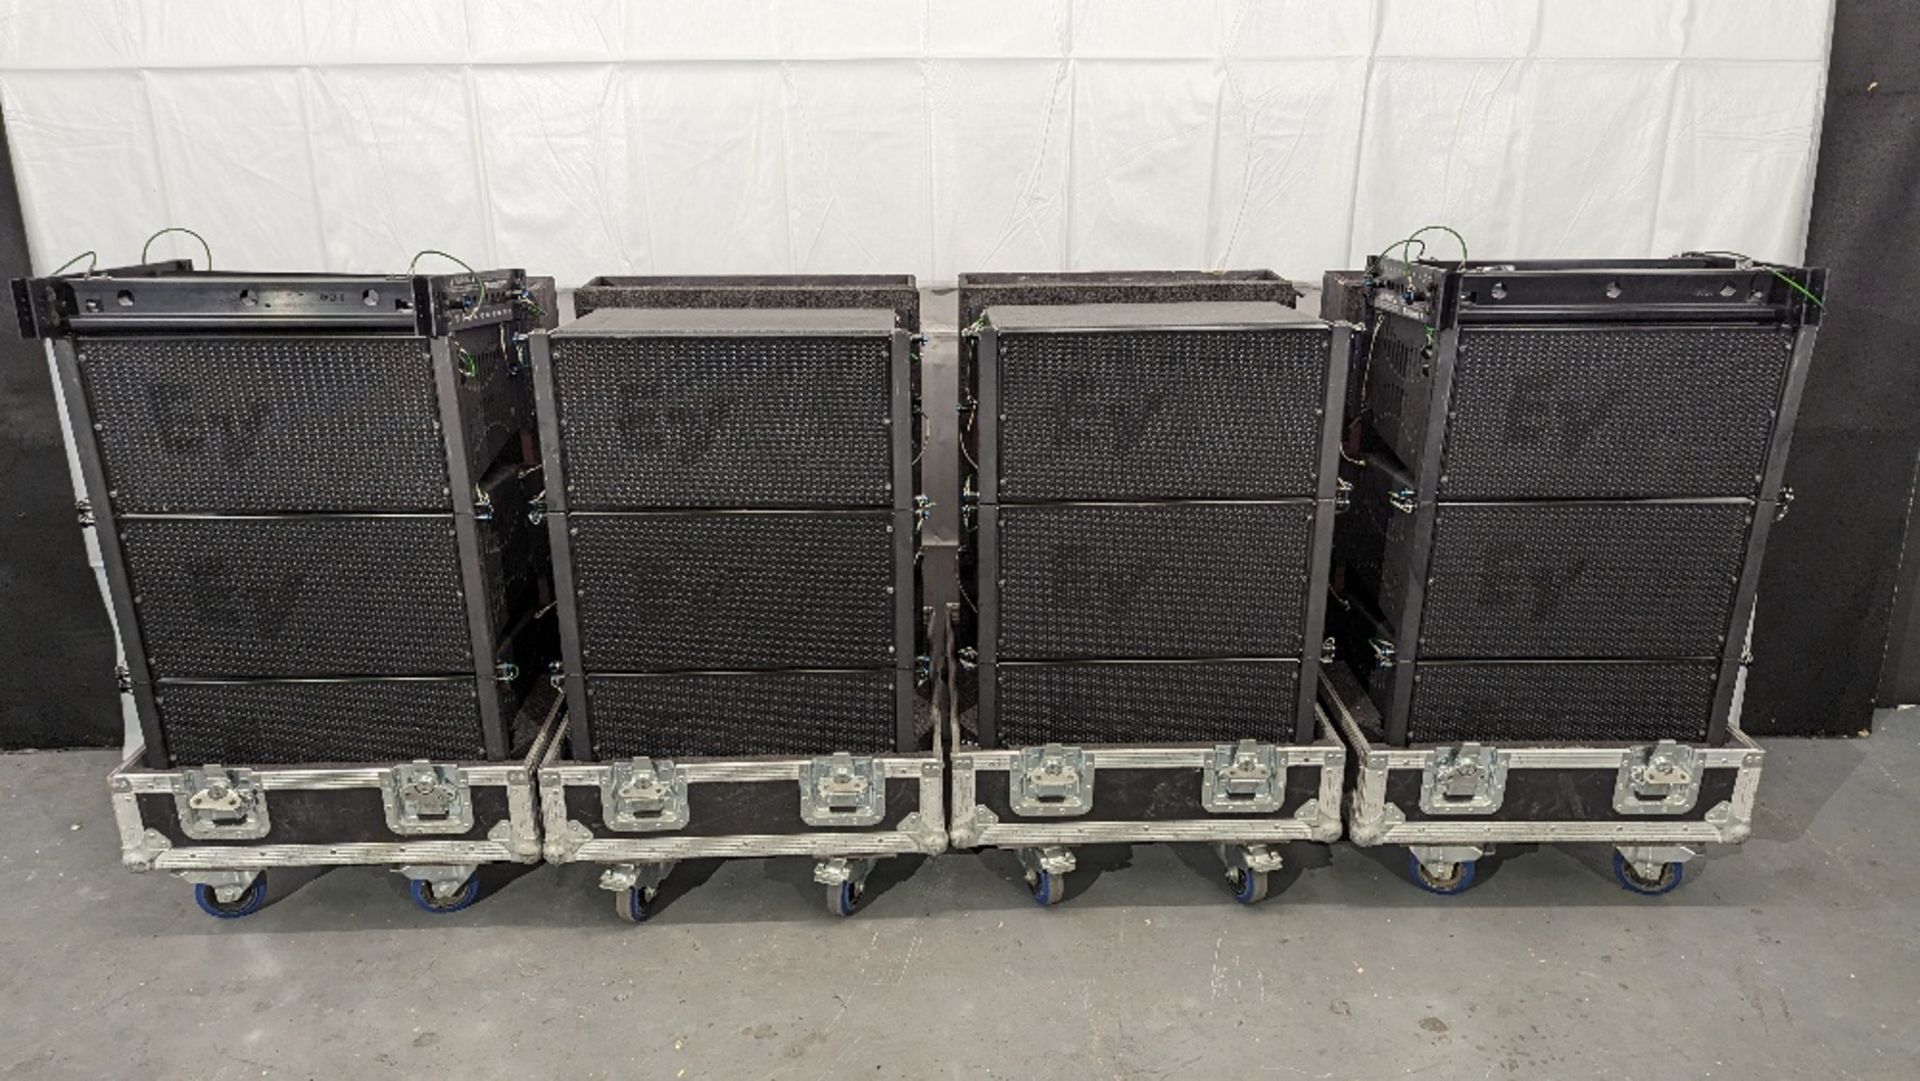 Electro-Voice PA Sound System - (12) XLE181 Speakers, (4) XCS312 Subs & Associated Equipment - Image 7 of 19